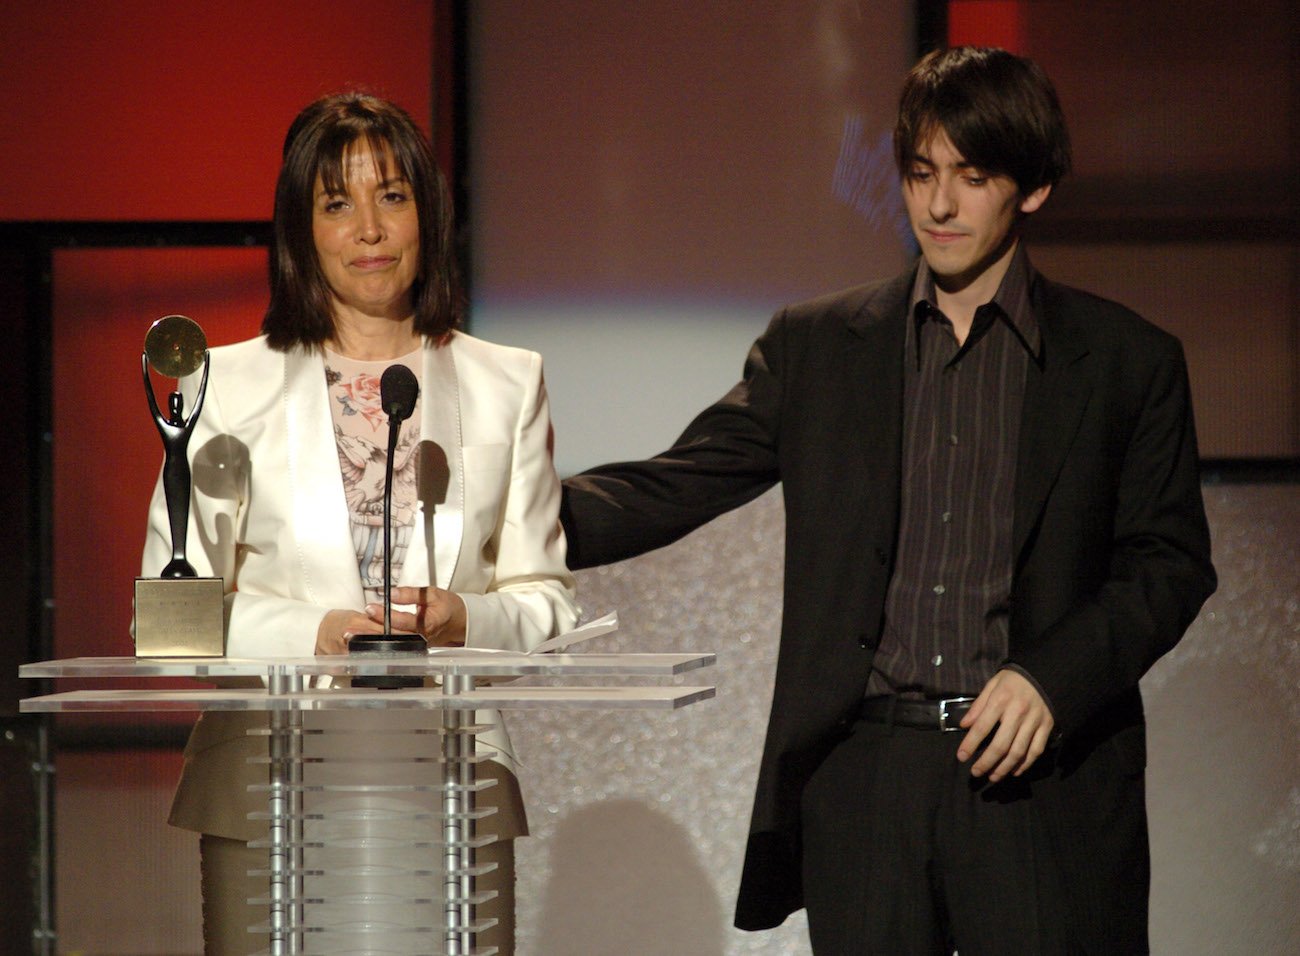 George Harrison's son, Dhani Harrison, and his wife, Olivia Harrison during George's induction into the Rock & Roll Hall of Fame in 2004.